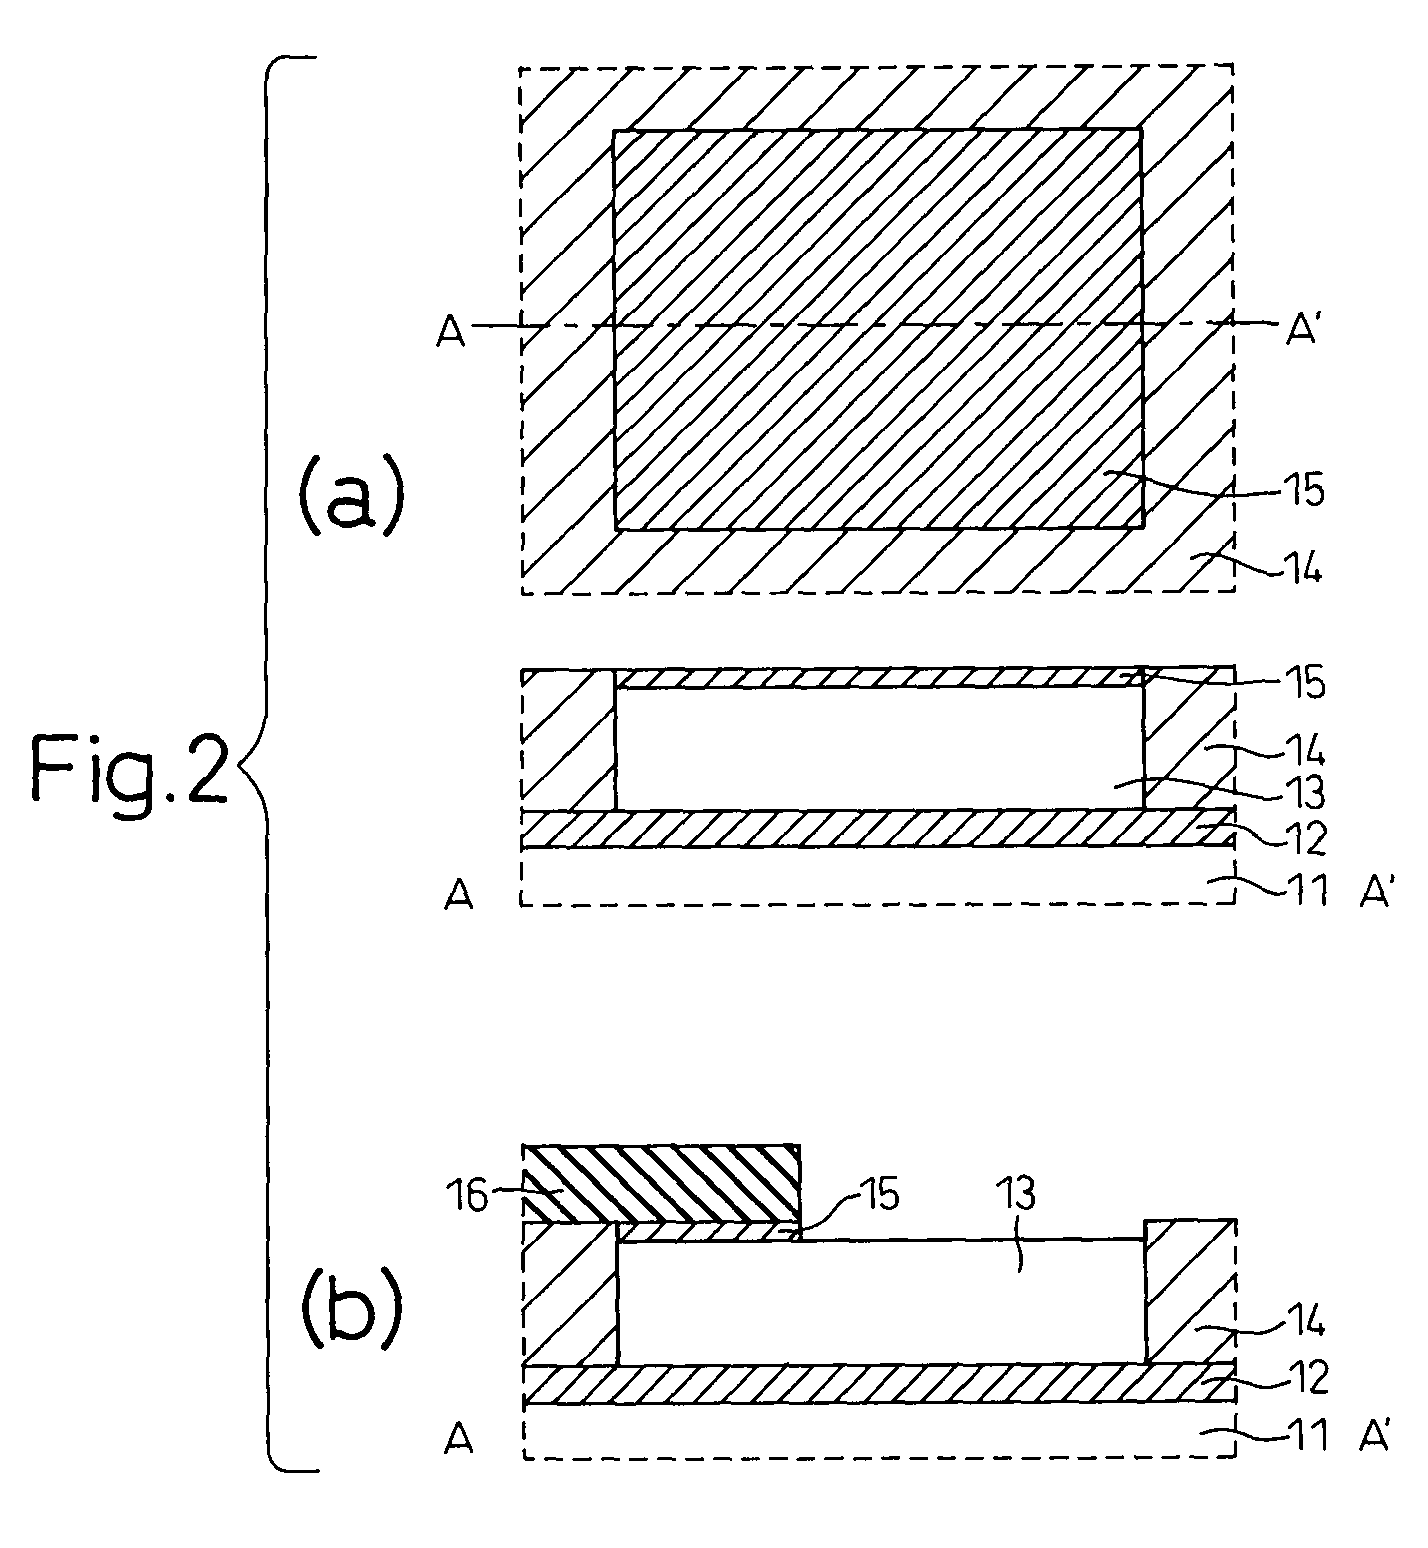 Insulated gate type semiconductor device and method for fabricating same